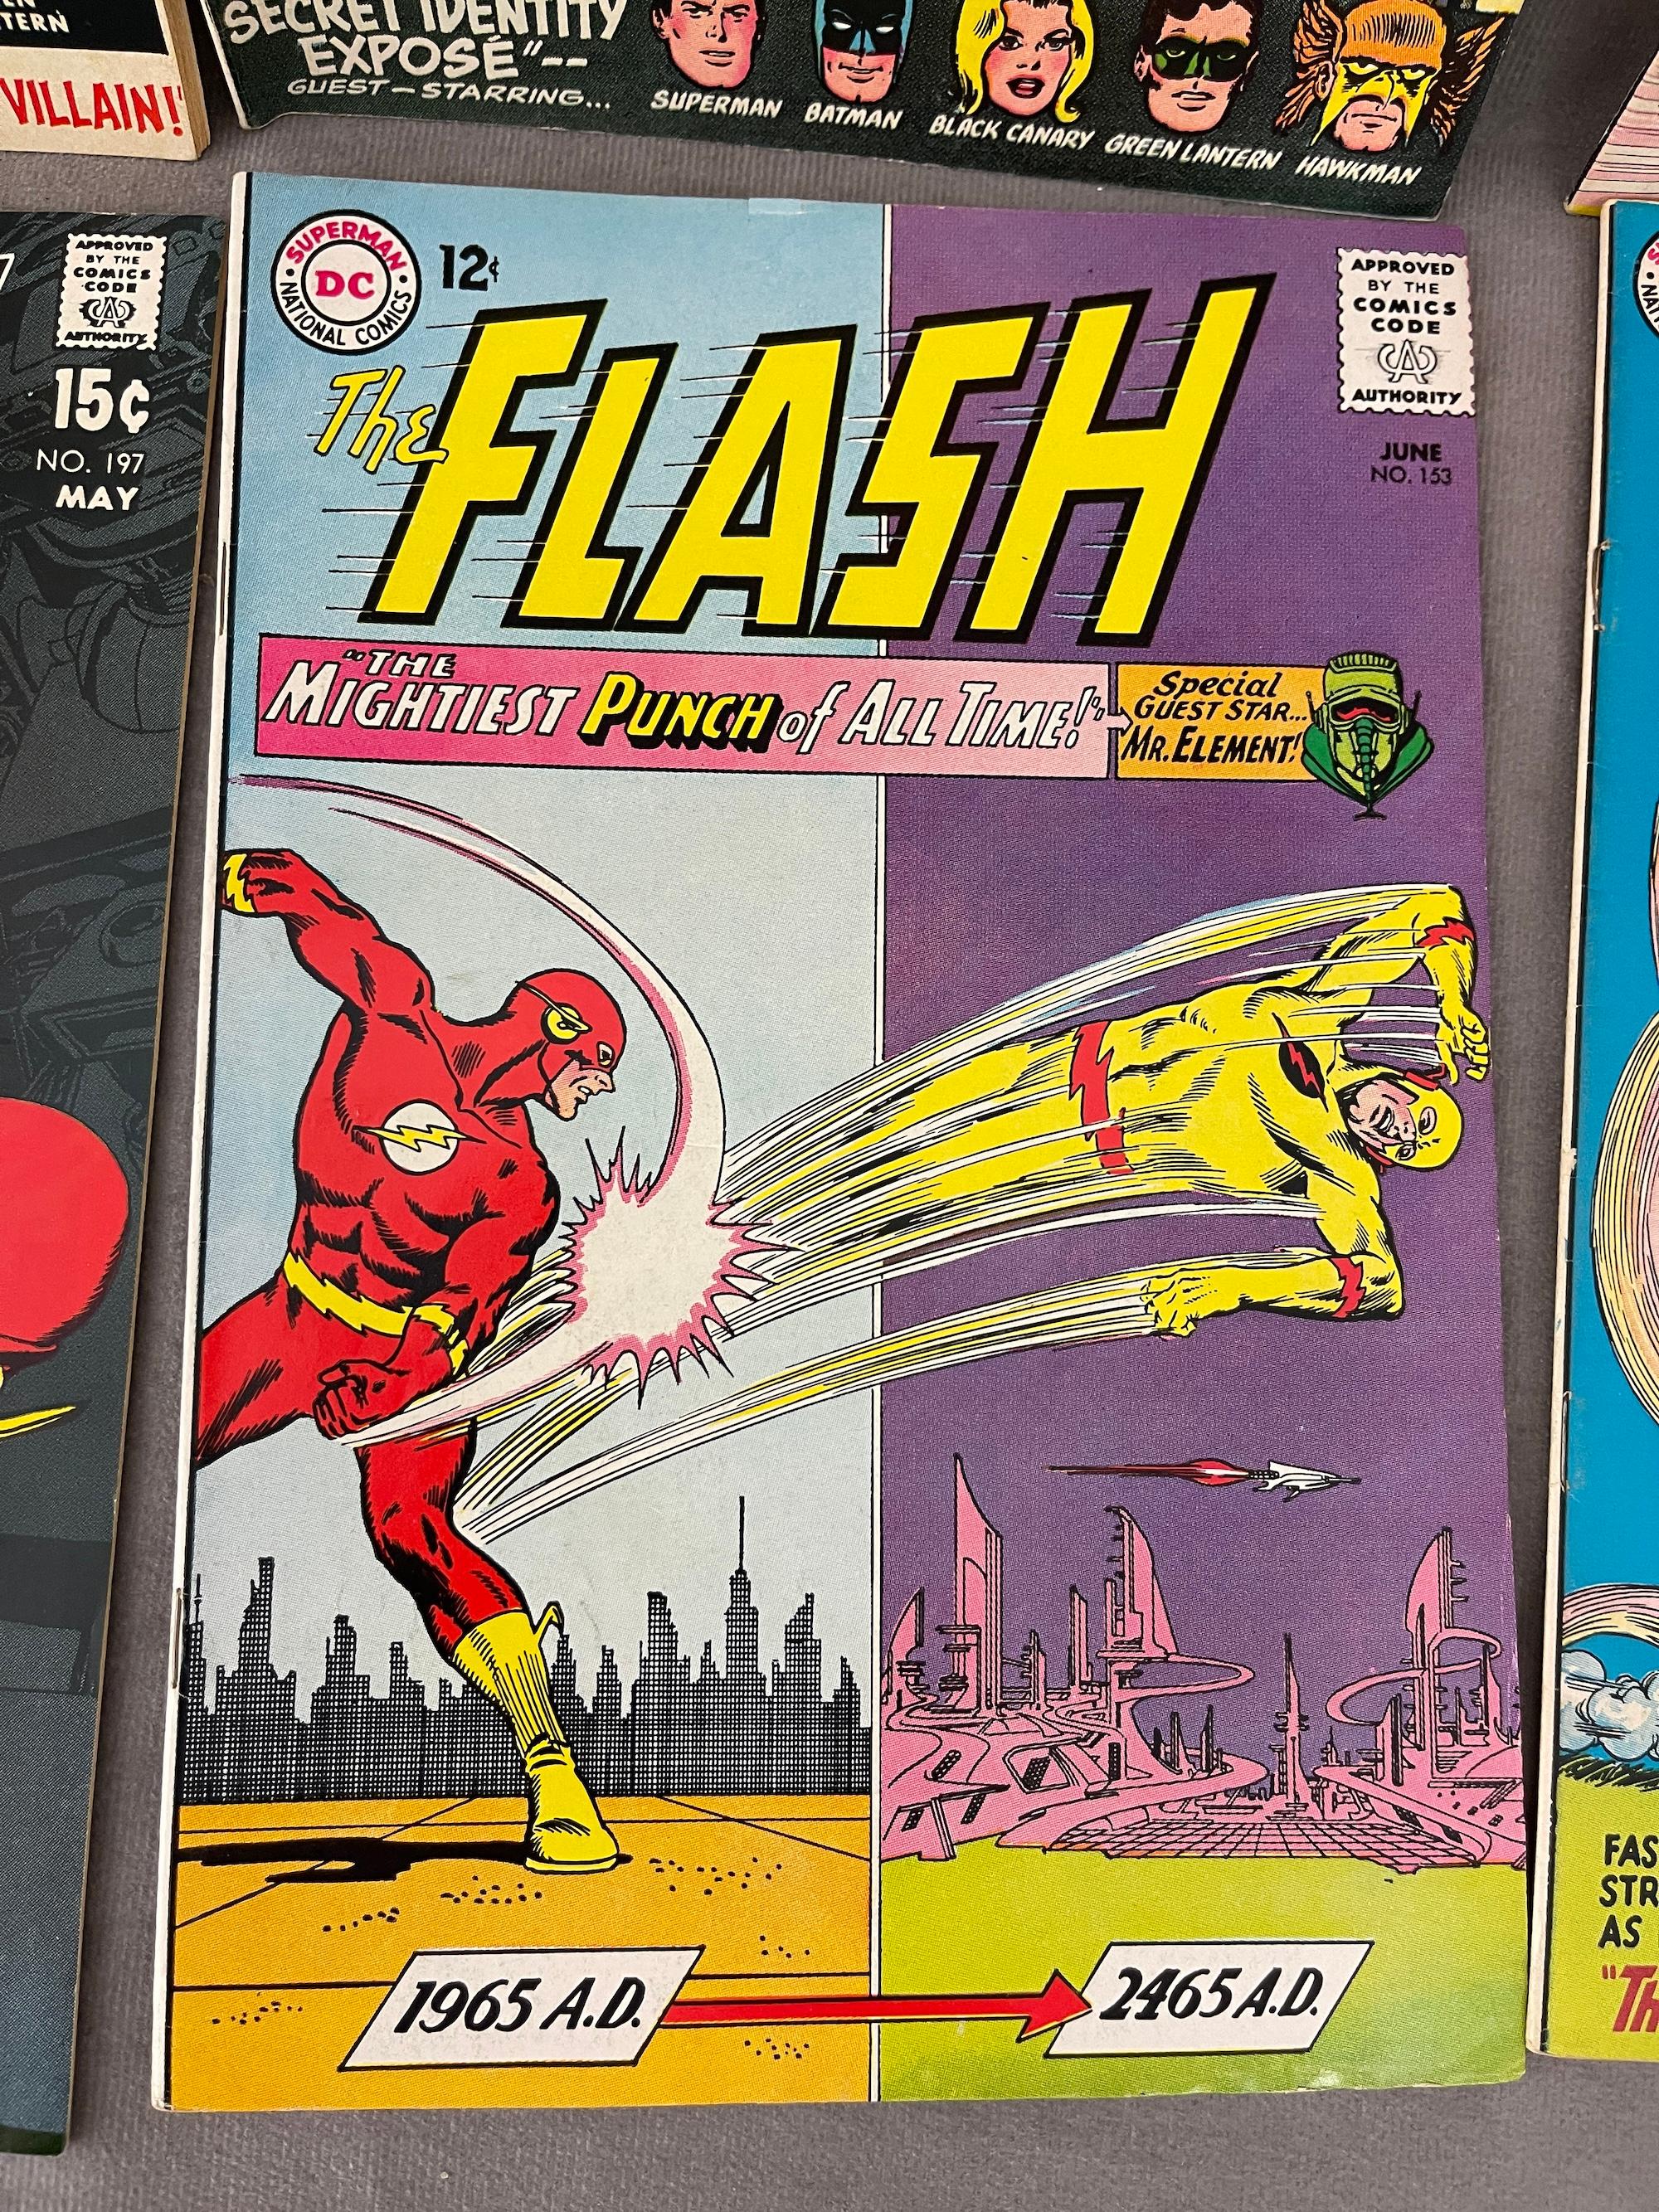 VINTAGE COMIC BOOK COLLECTION JUSTICE FLASH 136, 197, 153, 213, 204,154 LOT 6